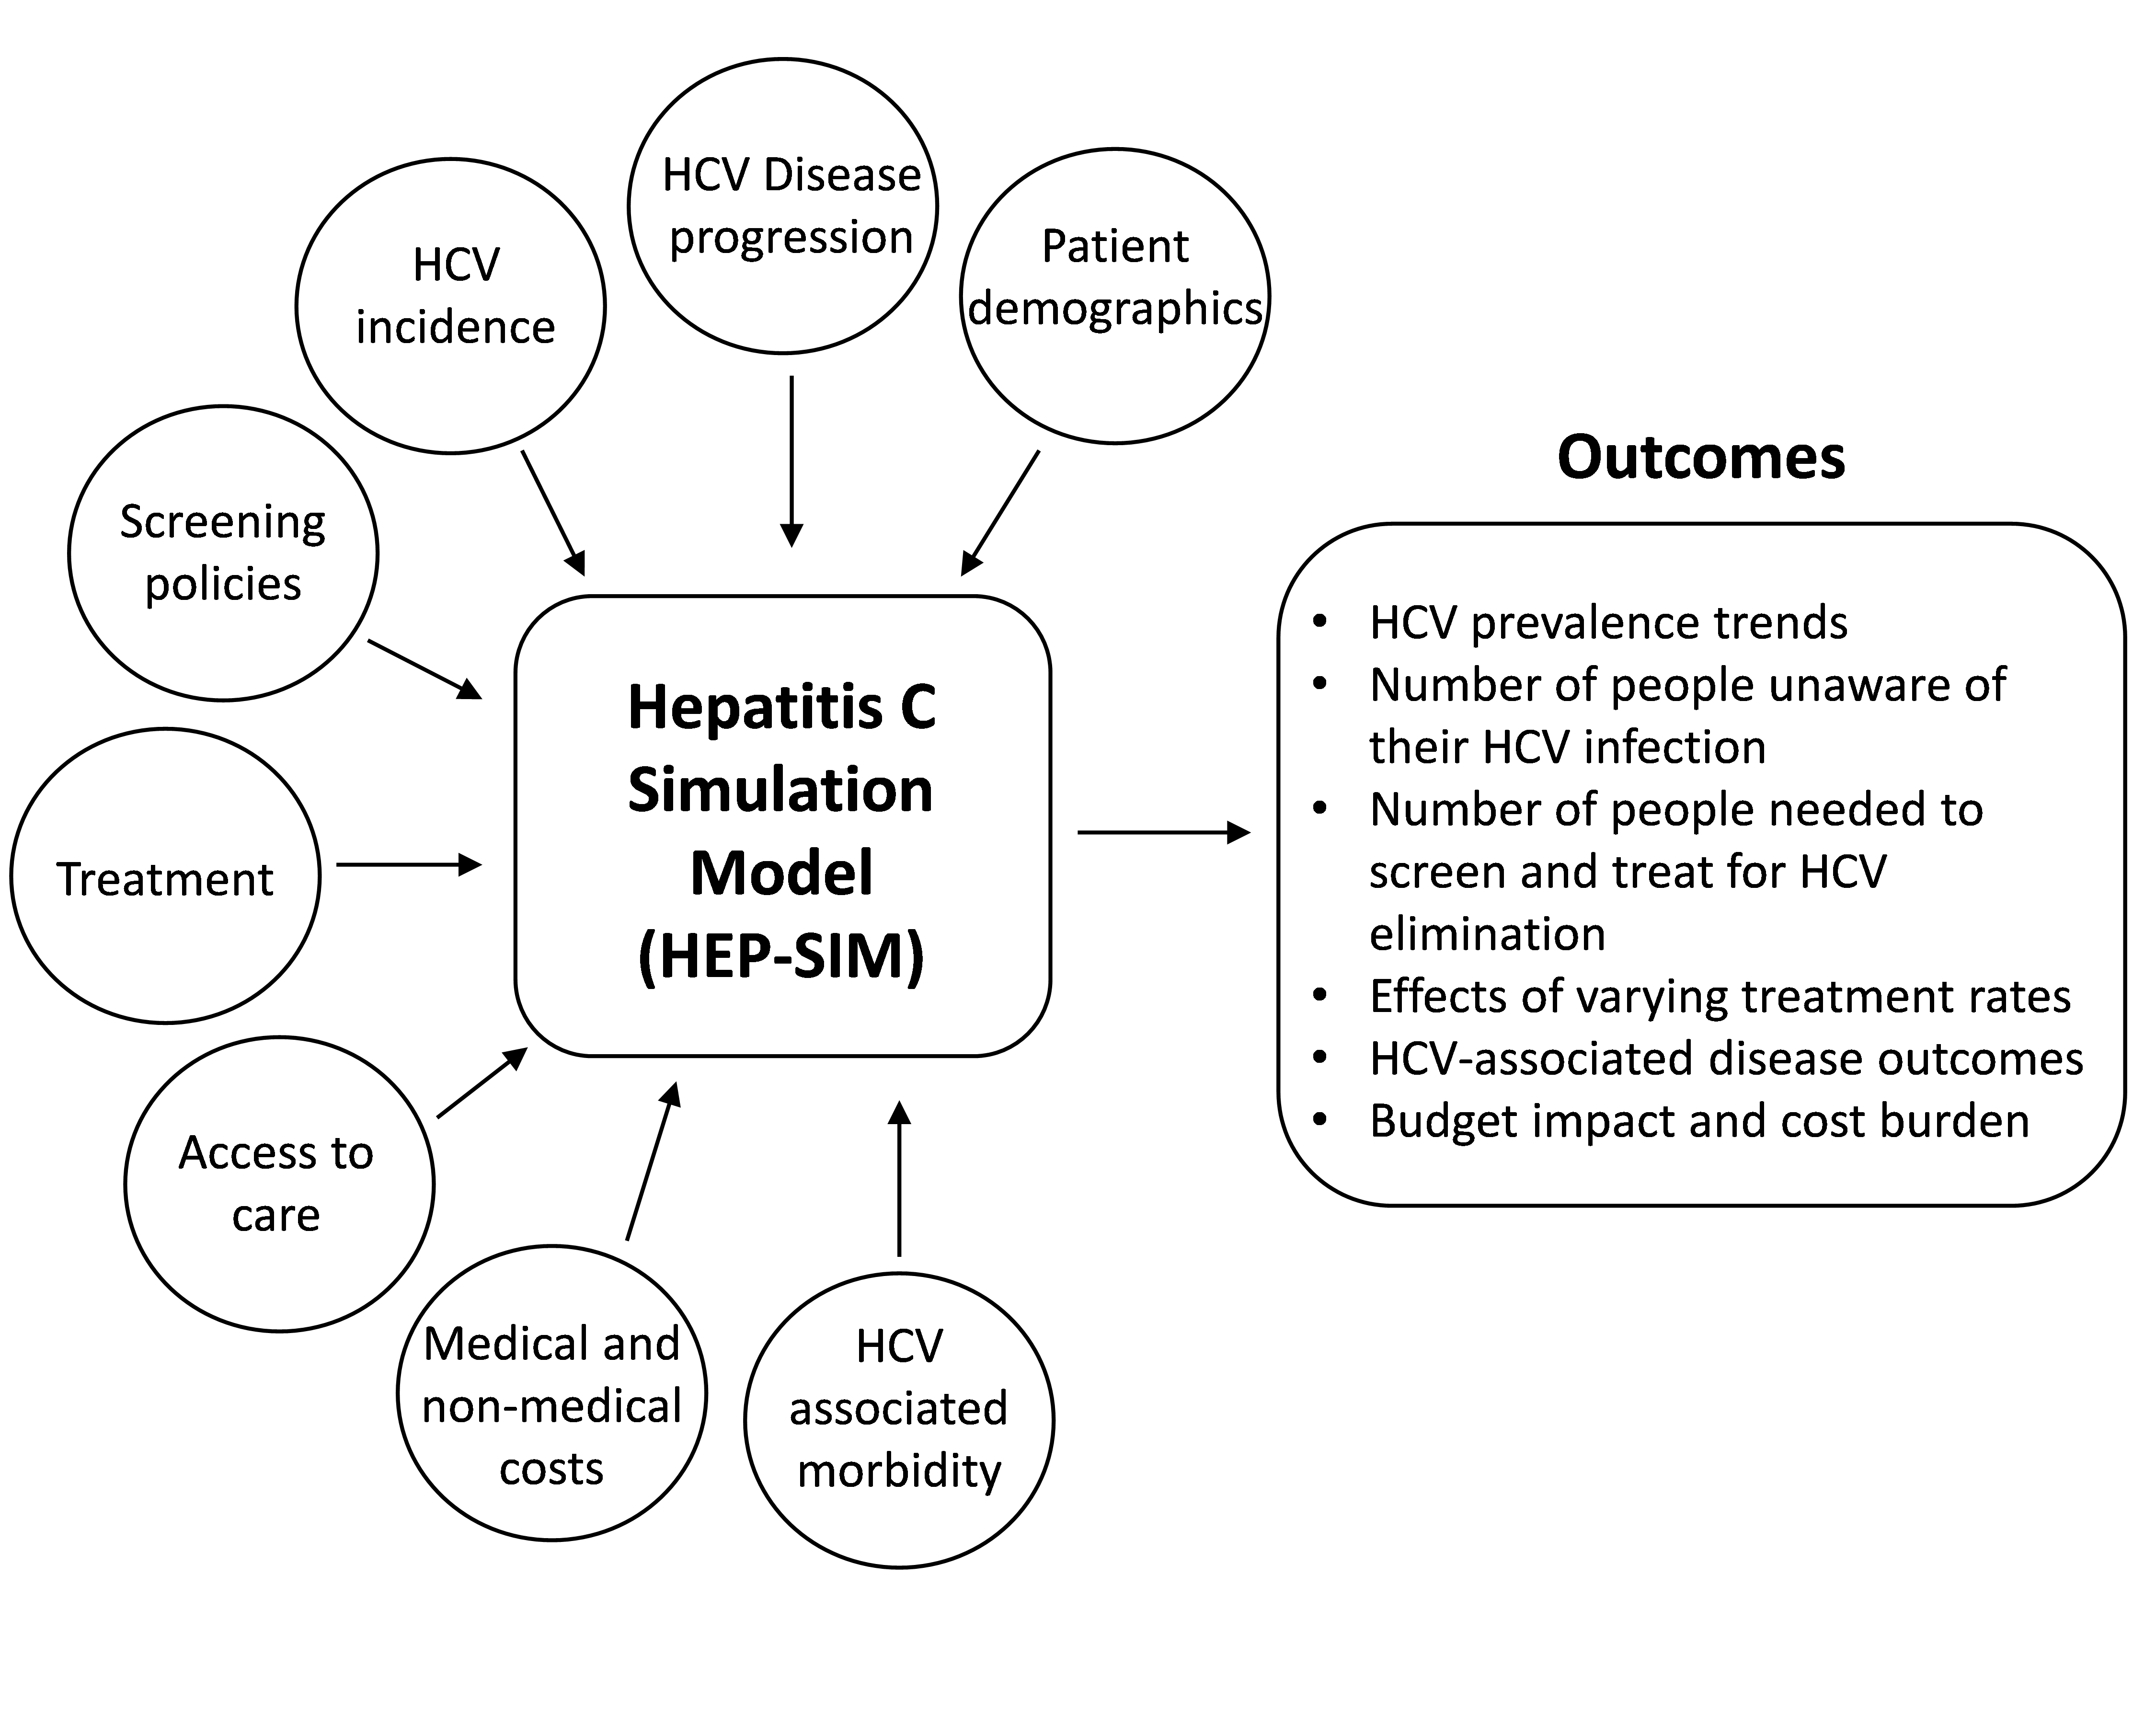 Schematic showing the key components and outcomes of HEP-SIM model.